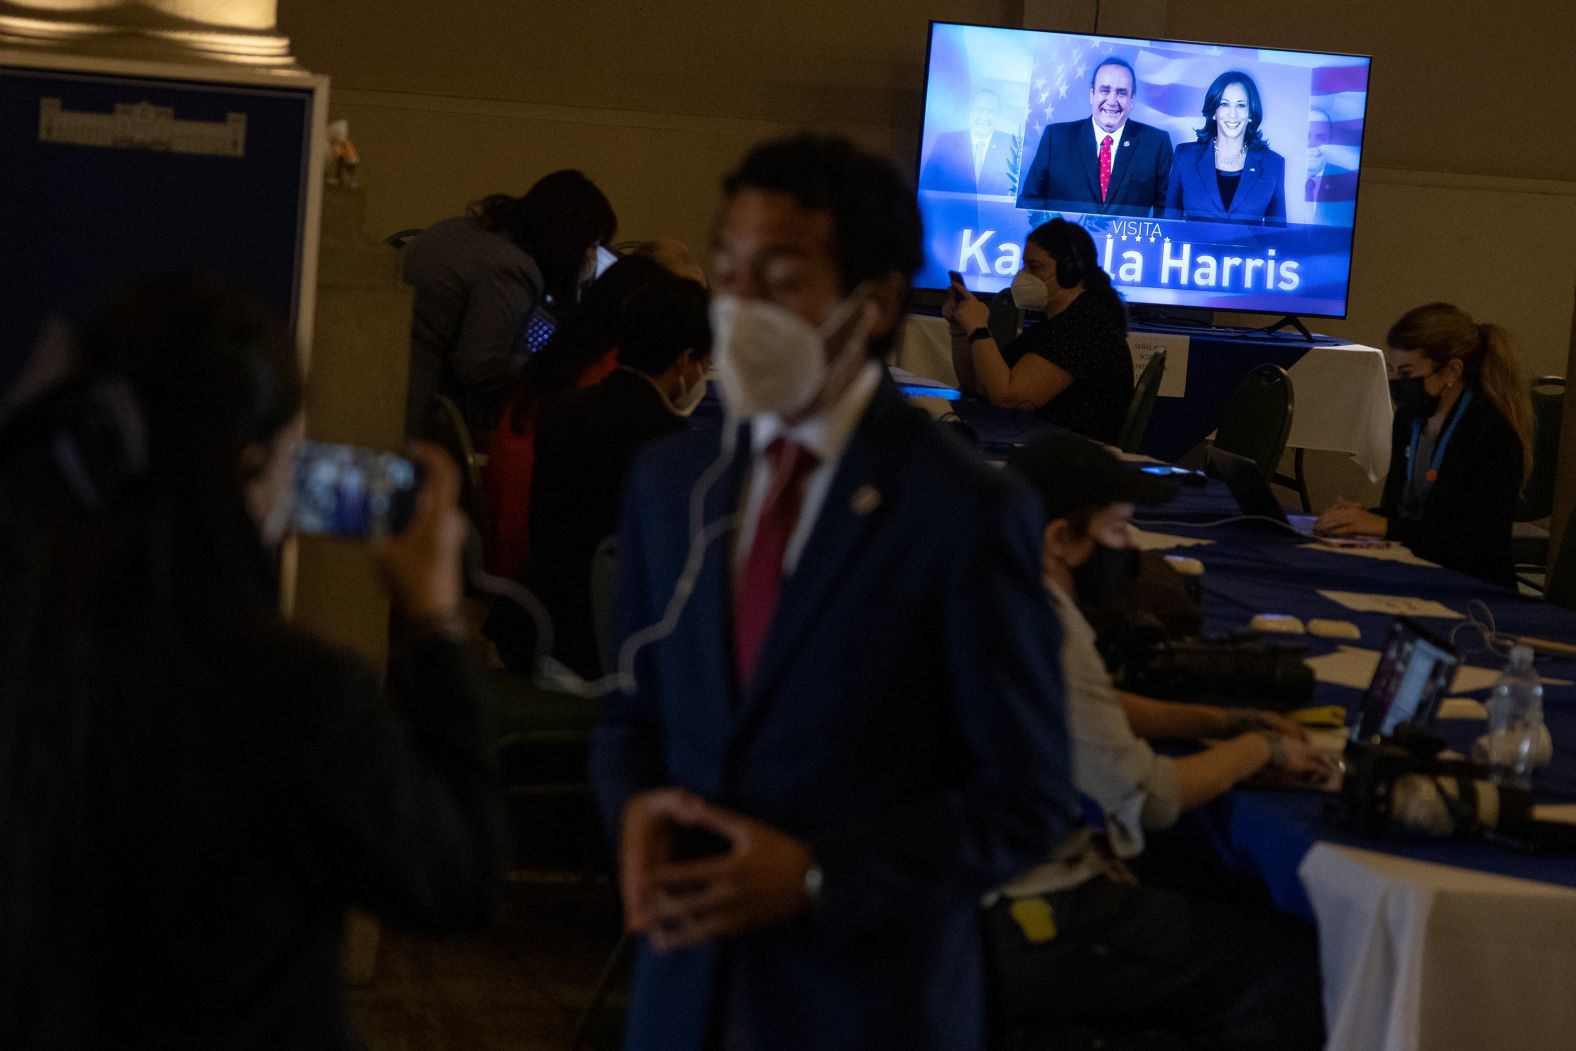 Media members work as a screen shows an image of Guatemala's President Alejandro Giammattei and Harris in Guatemala City on June 7.